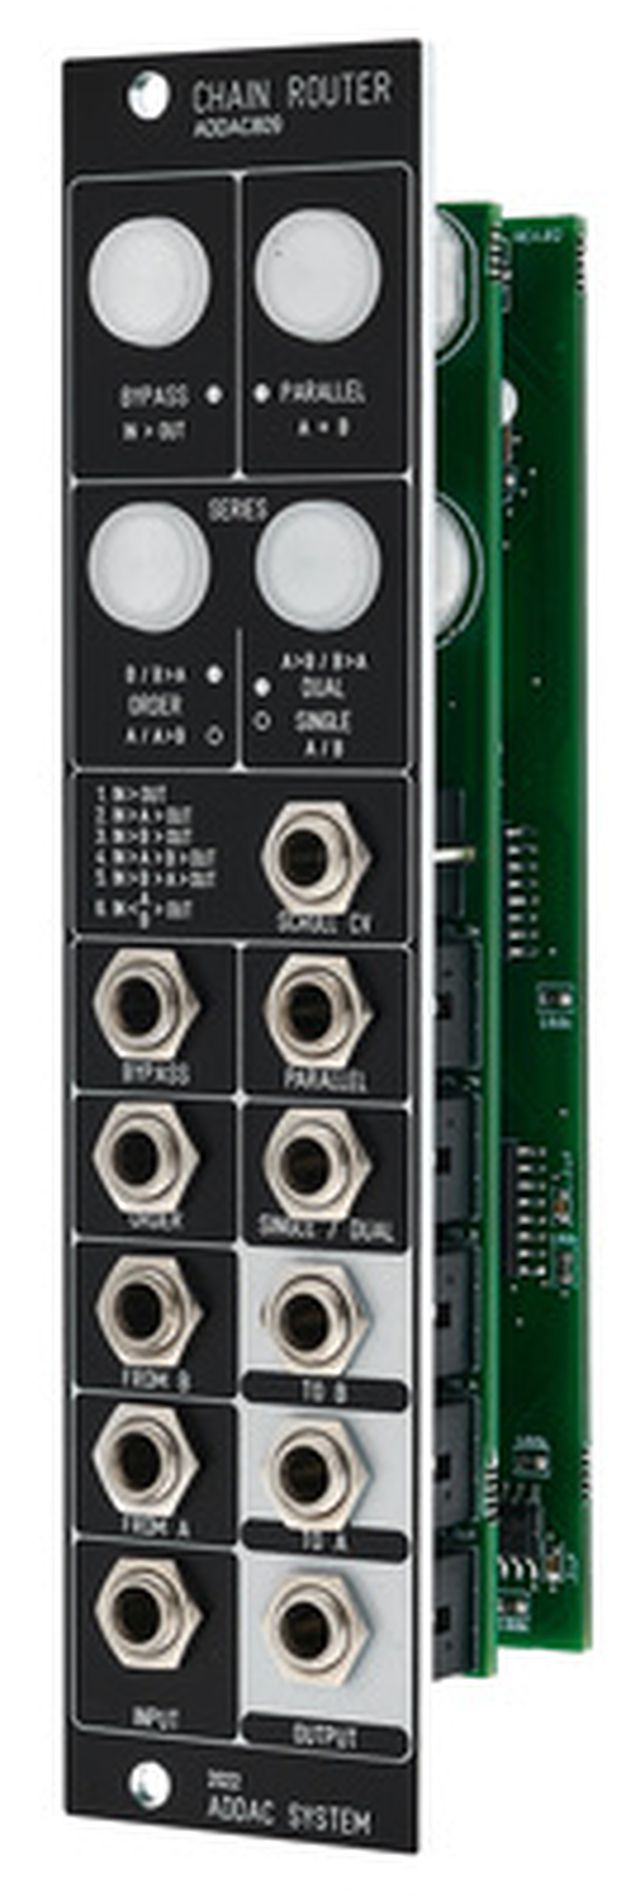 ADDAC 809 Chain Router